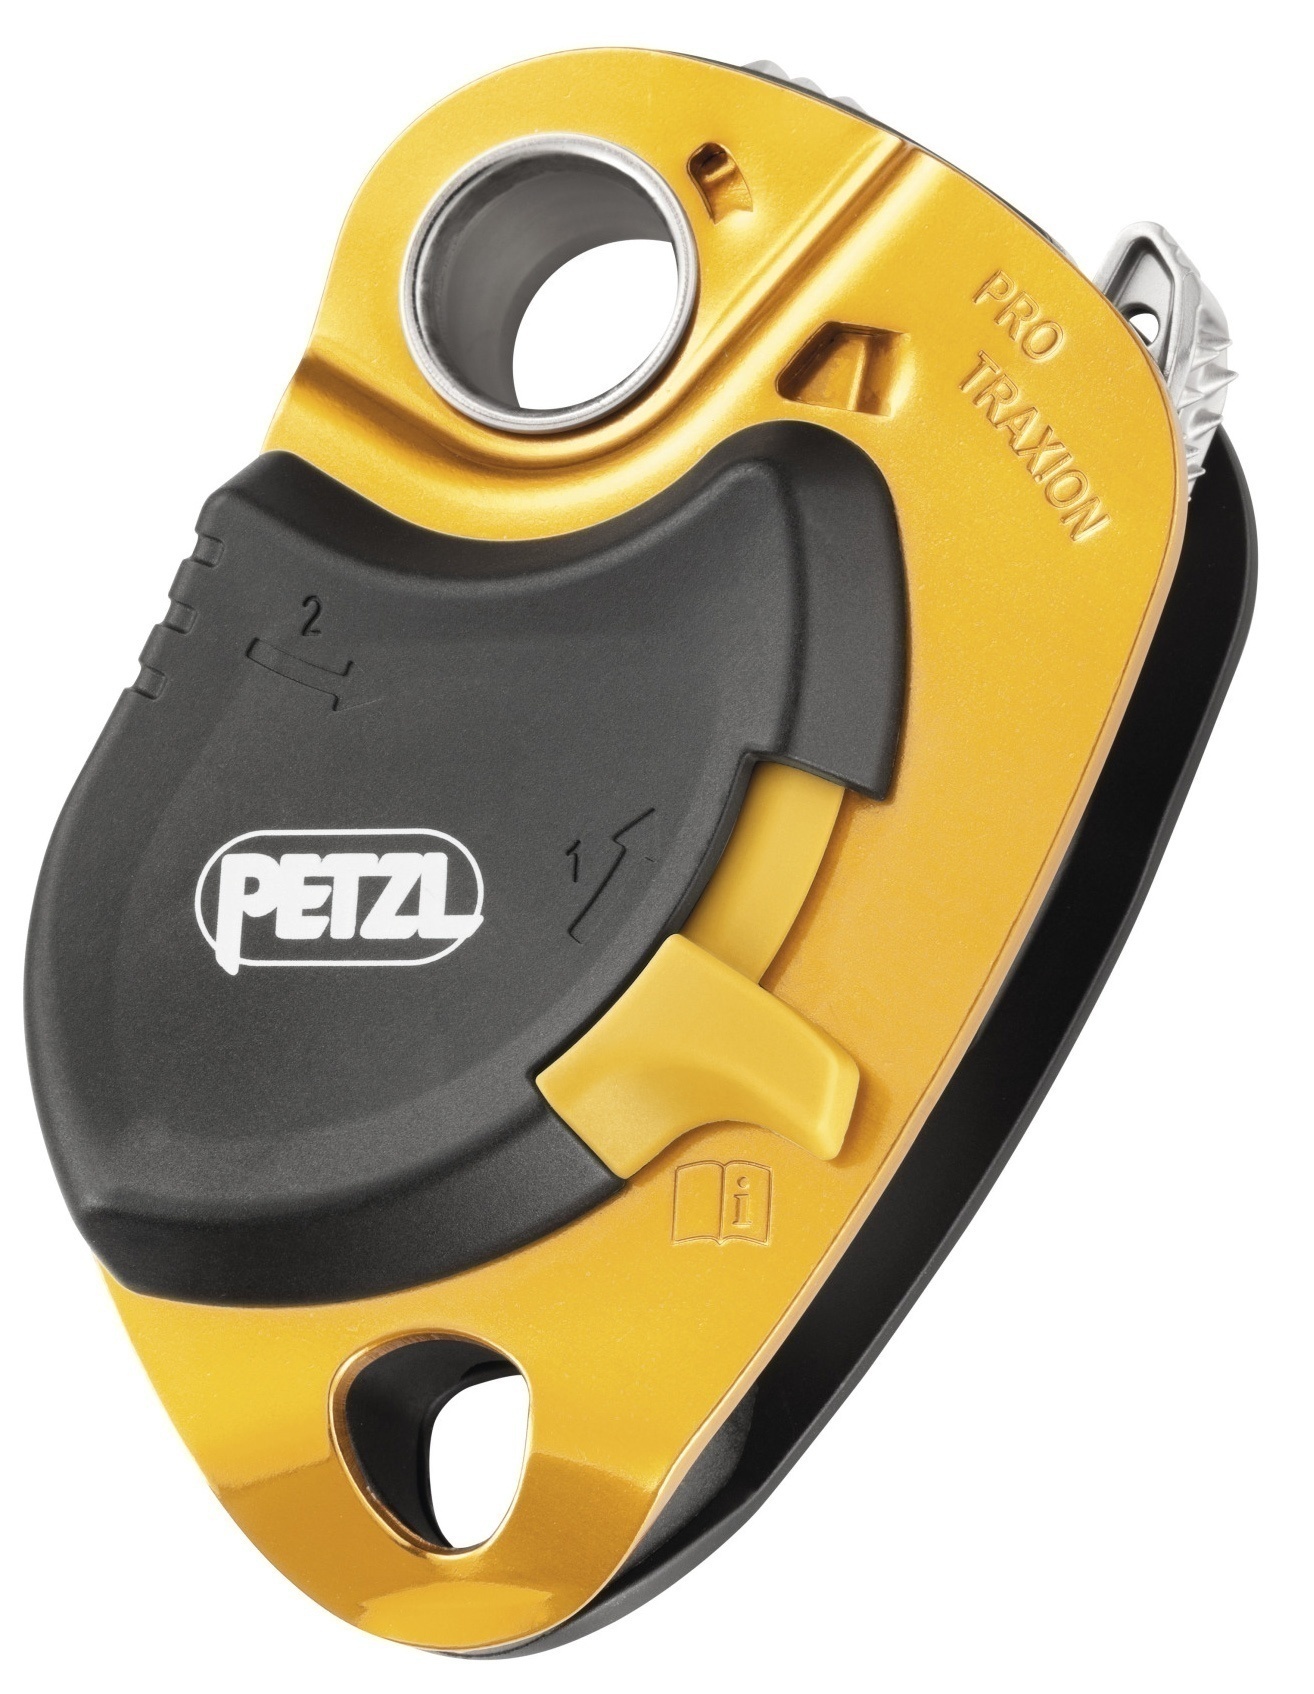 P51 Petzl Pro Traxion Highly Efficient Self Jamming Pulley Rope Clamp from GME Supply